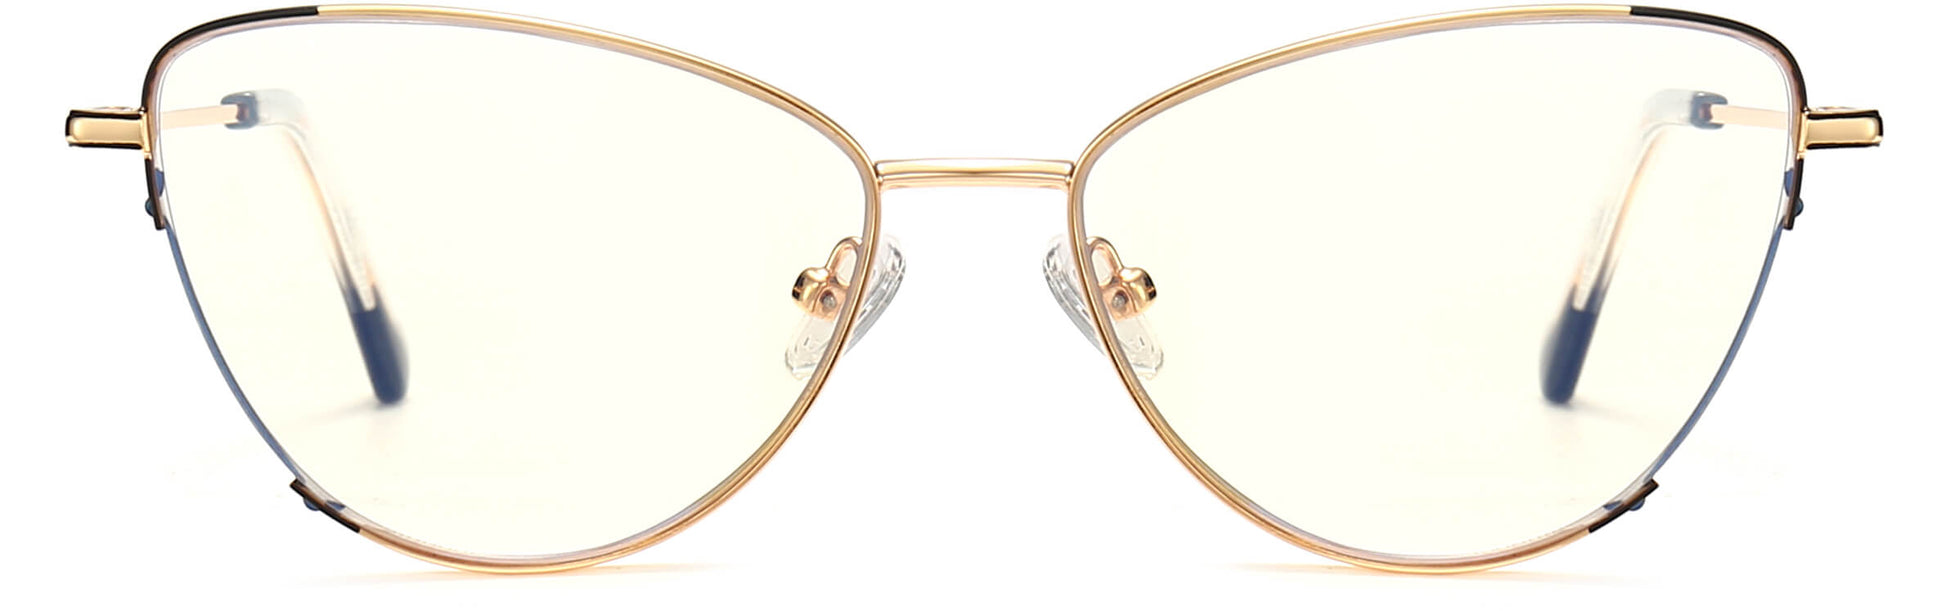 Indie Cateye Gold Eyeglasses from ANRRI, front view